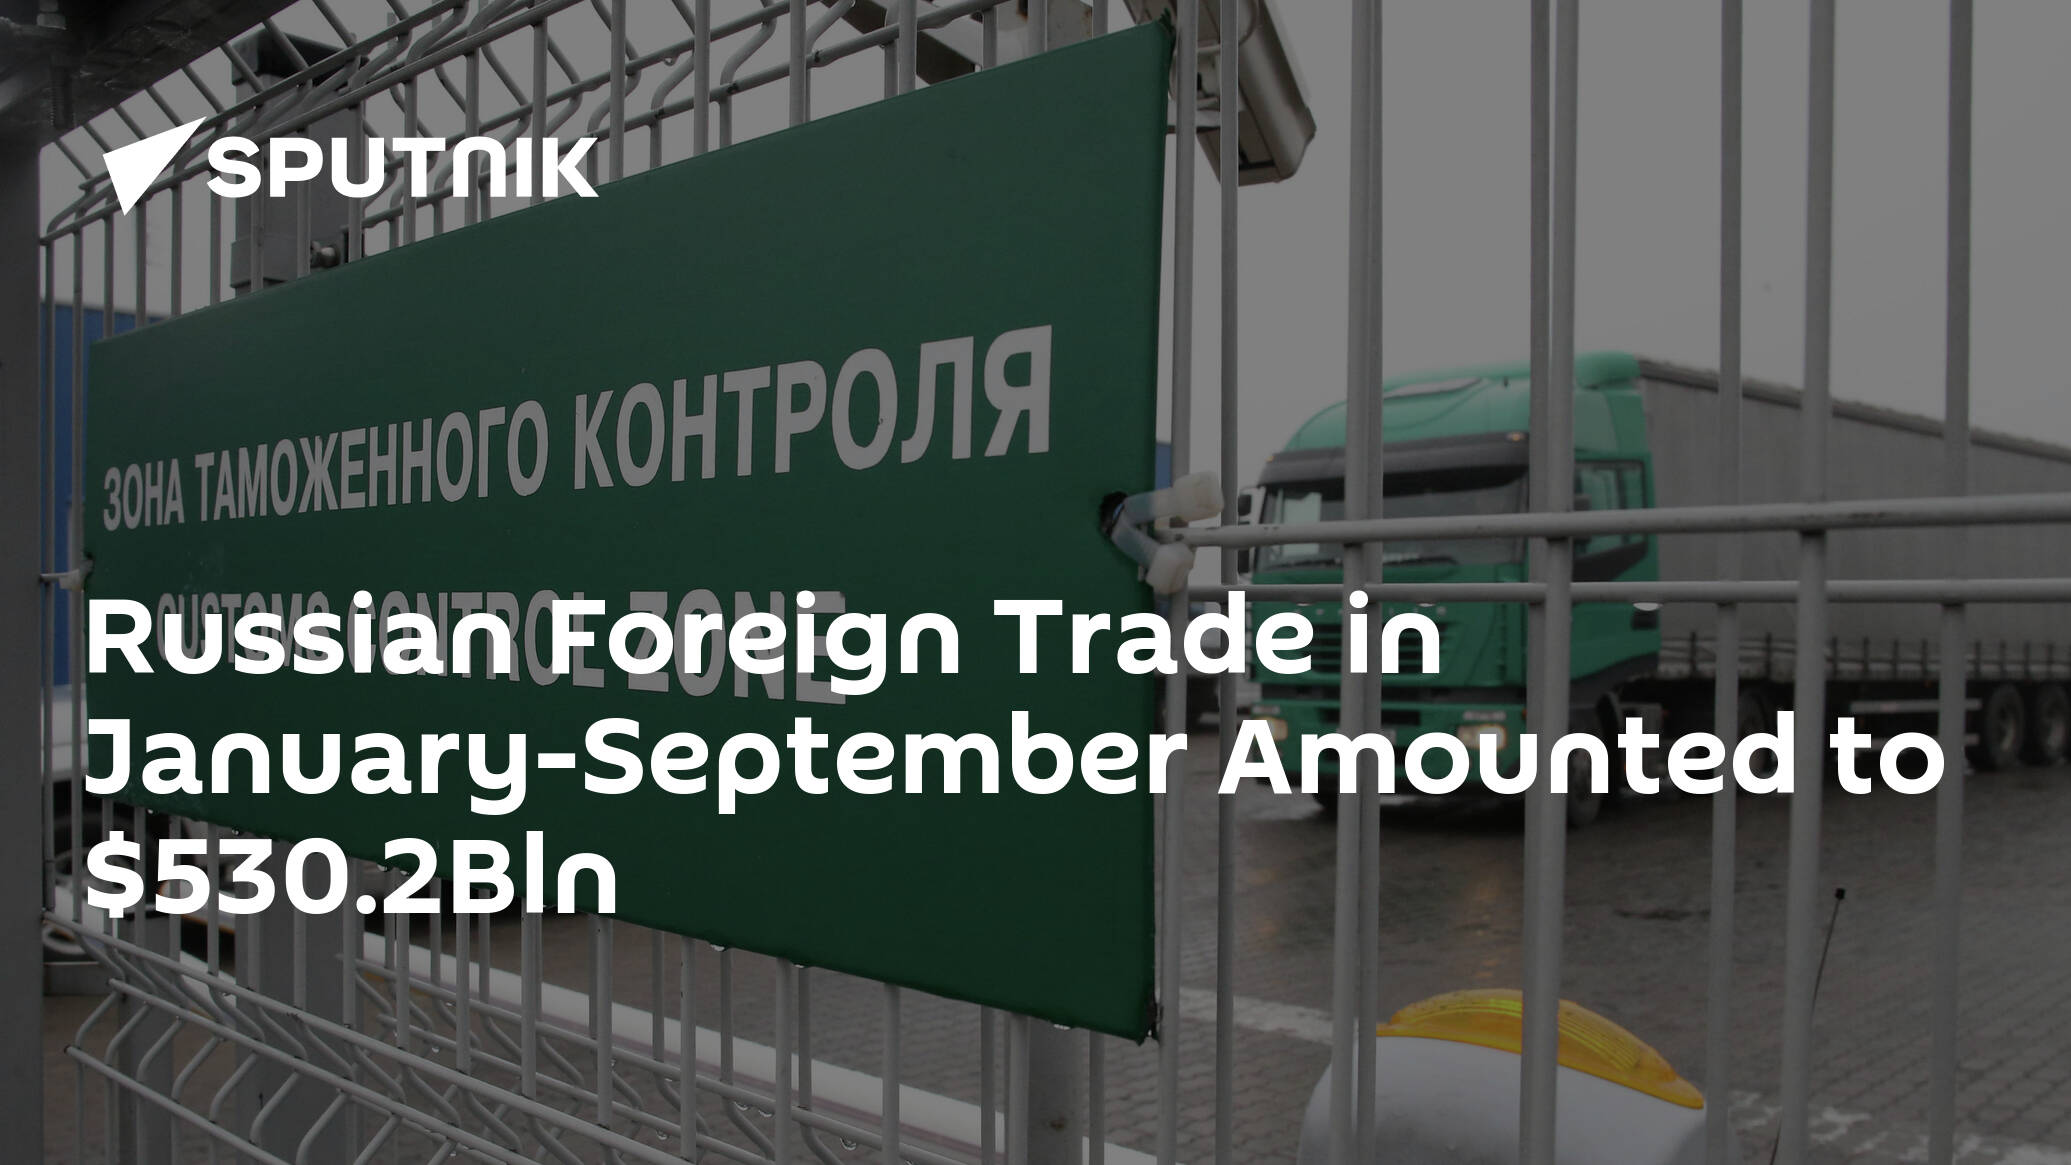 Russian Foreign Trade in January-September Amounted to 0.2Bln